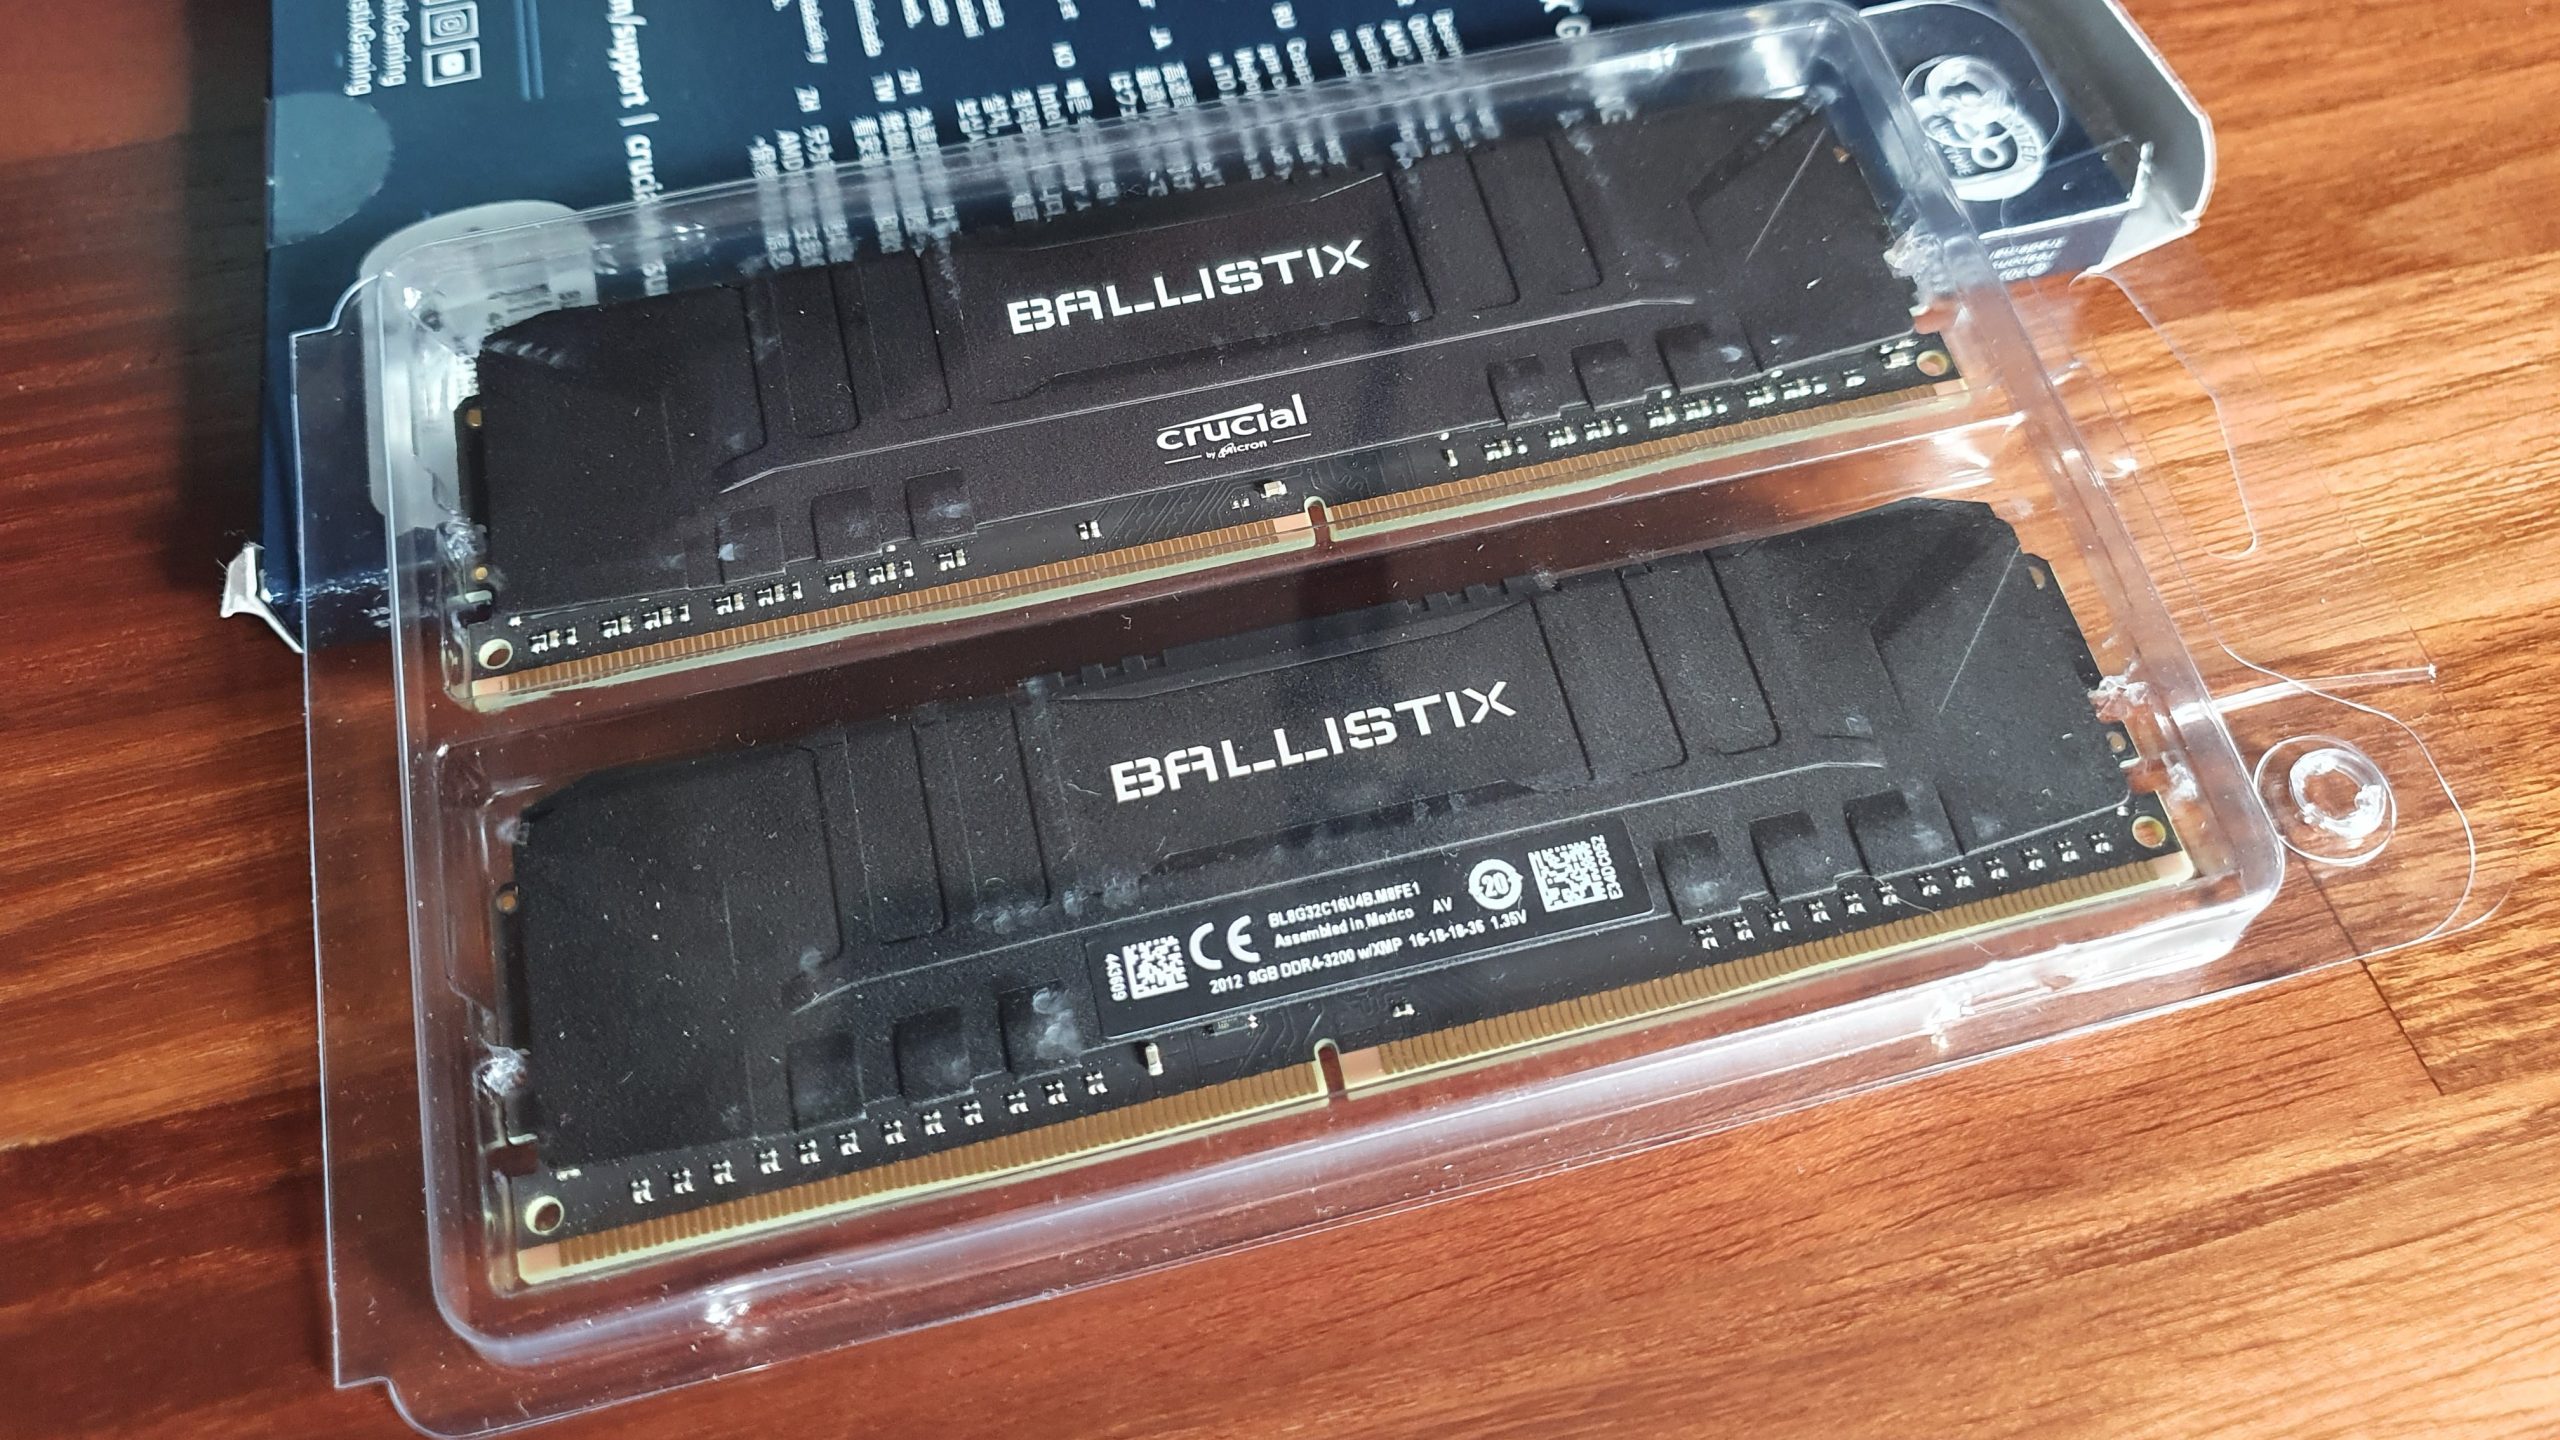 The Crucial Ballistix memory brand is no more